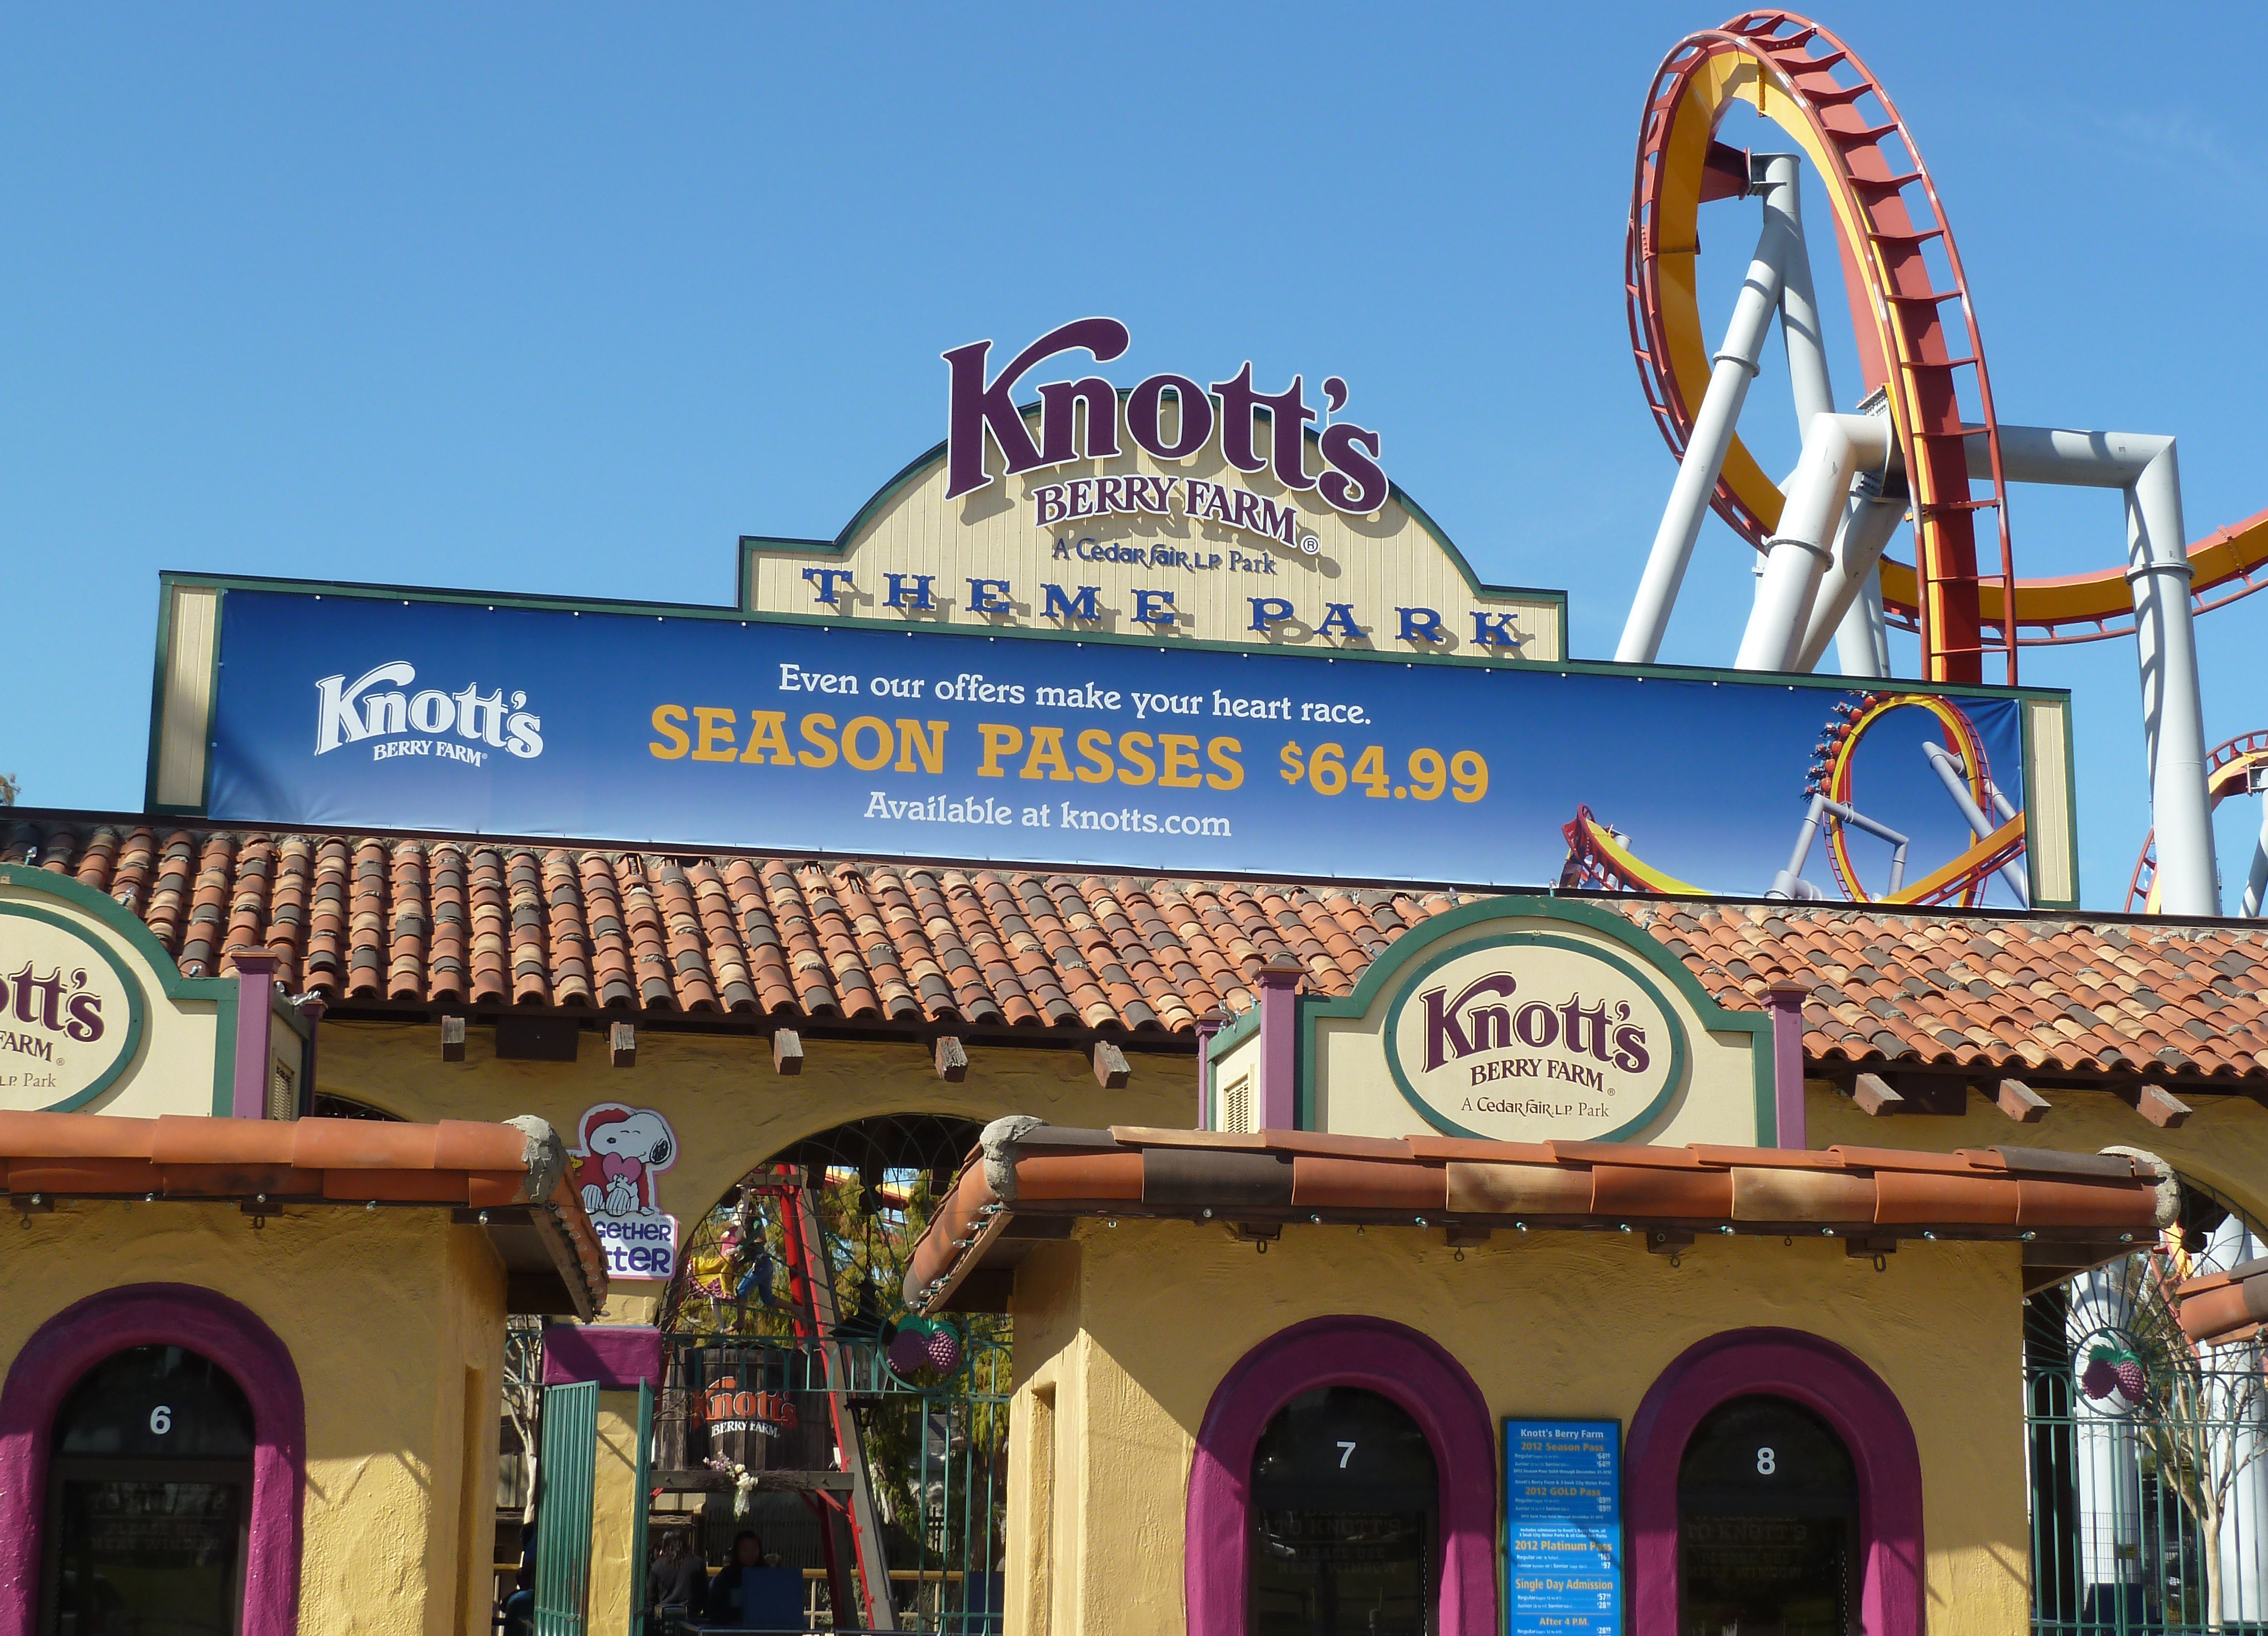 Knott's accidents